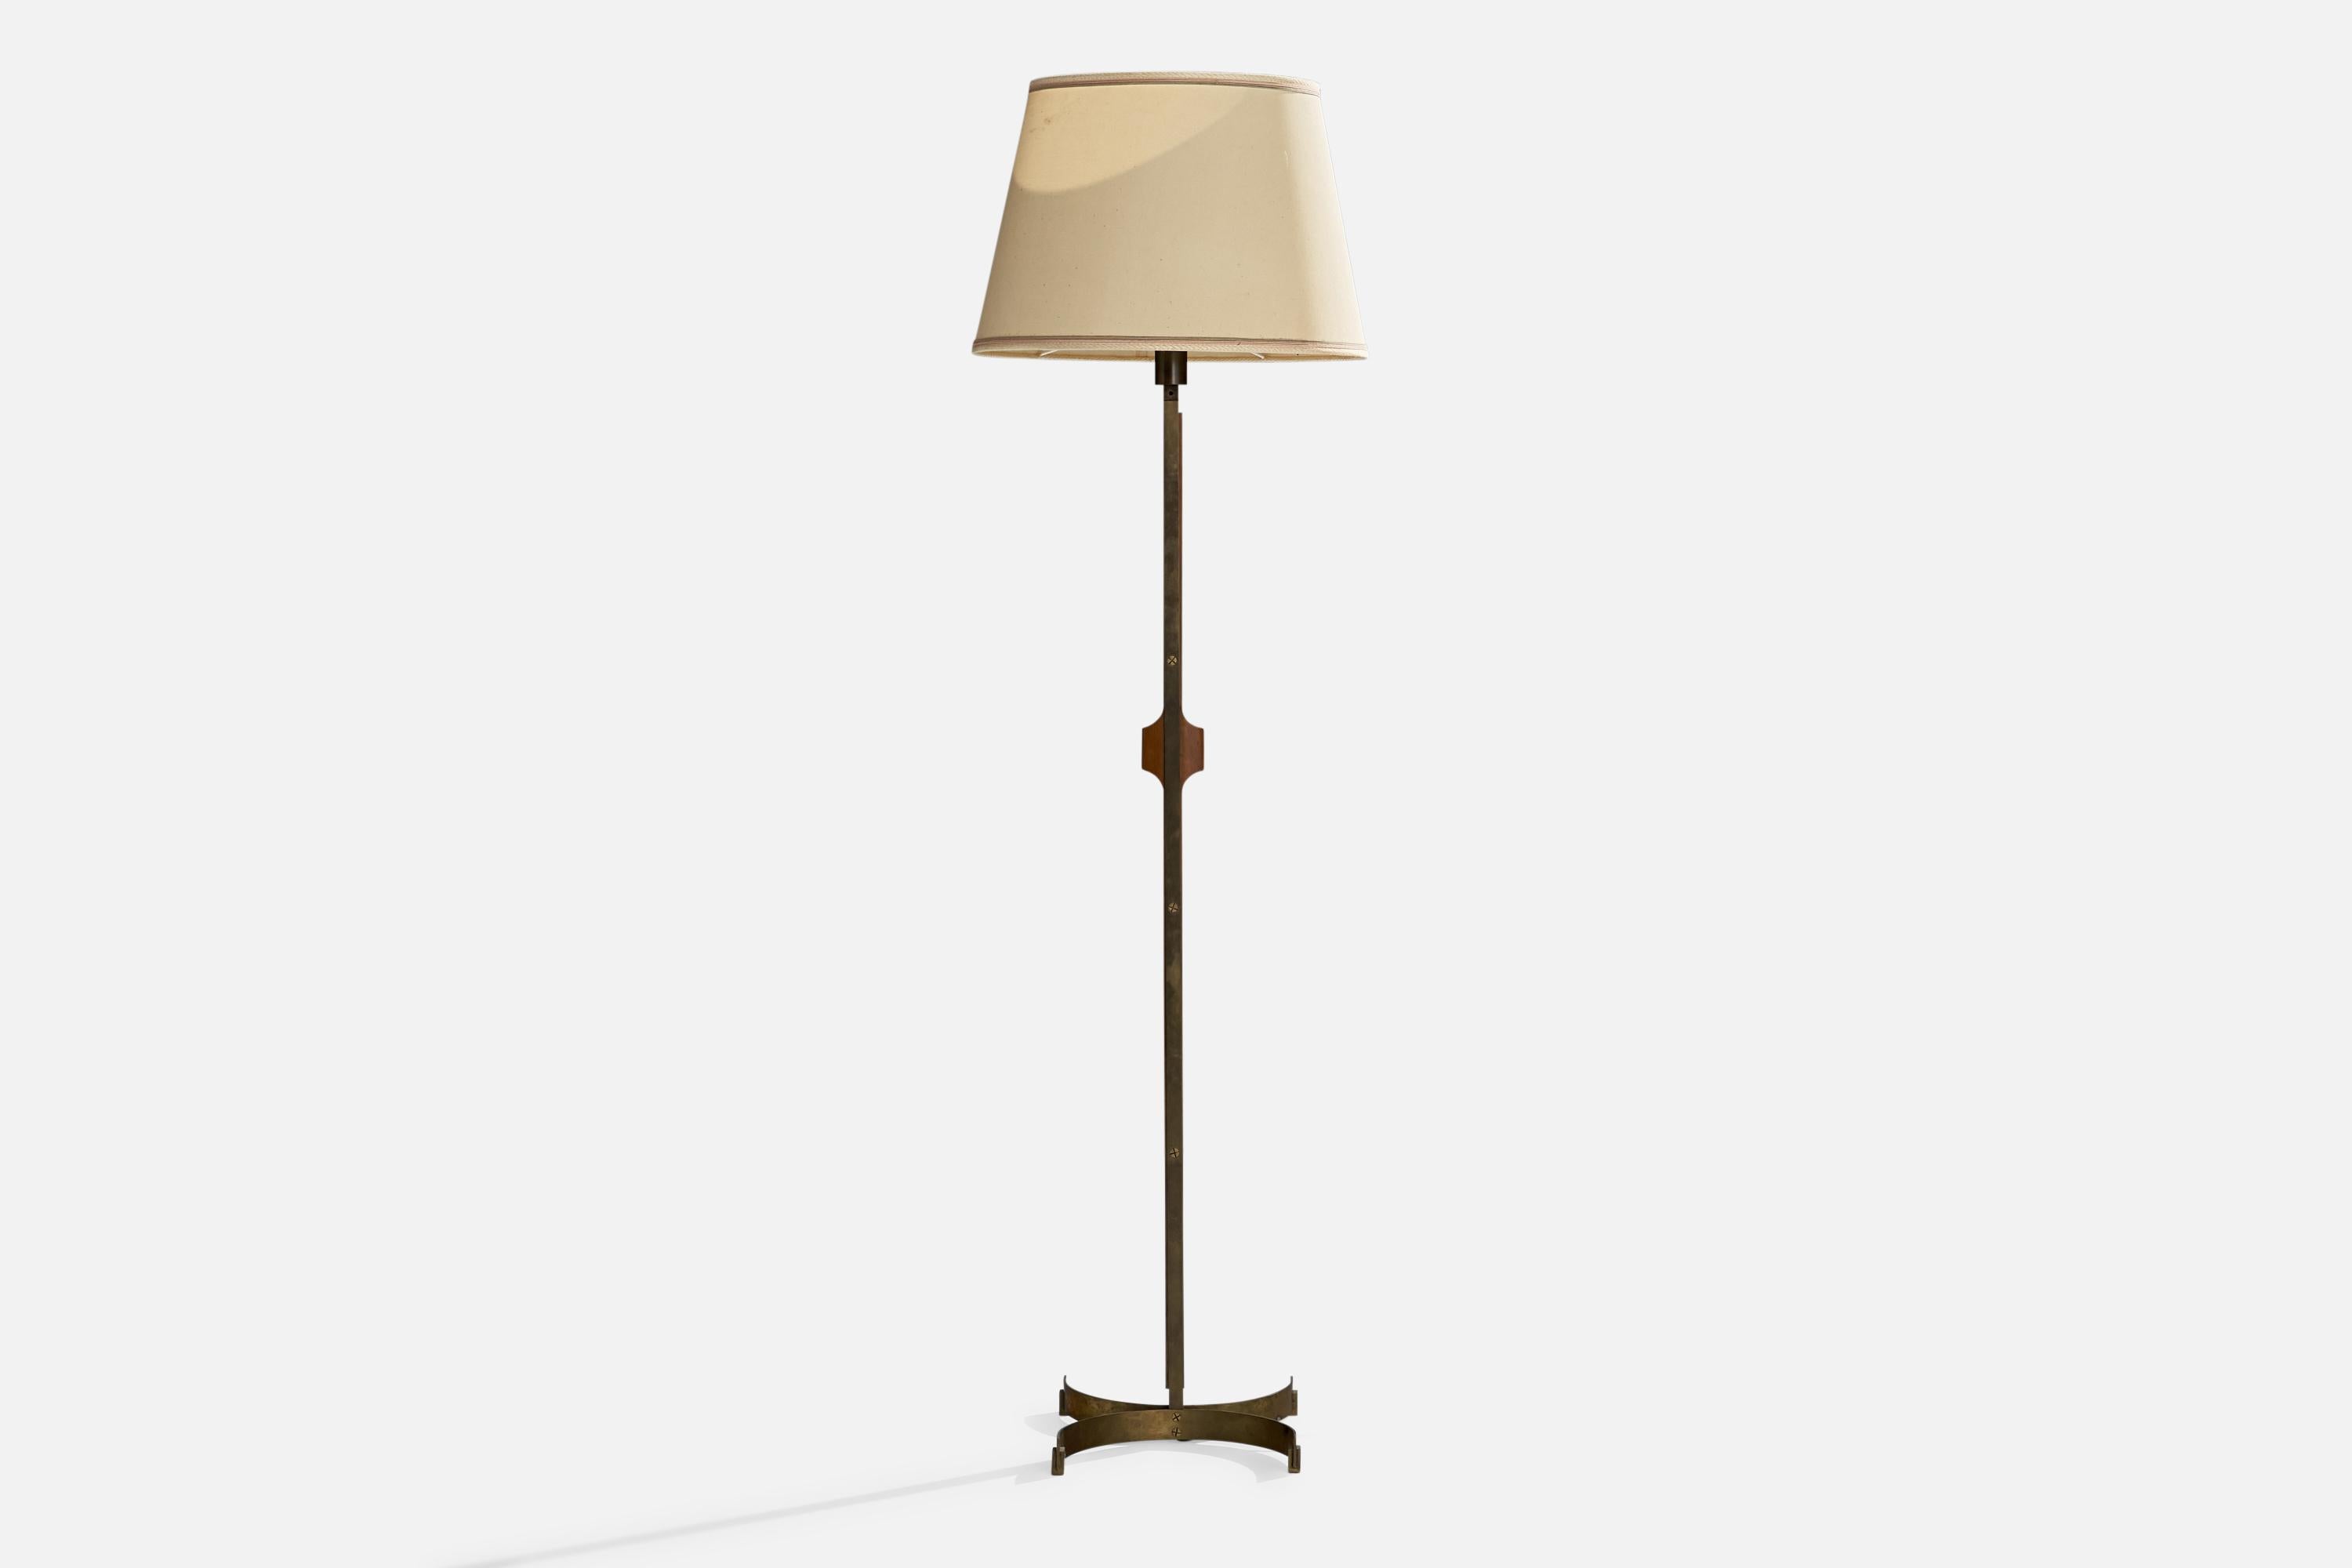 A walnut, brass and beige fabric floor lamp designed and produced in Italy,c. 1940s.

Overall Dimensions (inches): 69.5”  H x 20.25” W x 15” D
Stated dimensions include shade.
Bulb Specifications: E-26 Bulb
Number of Sockets: 1
All lighting will be